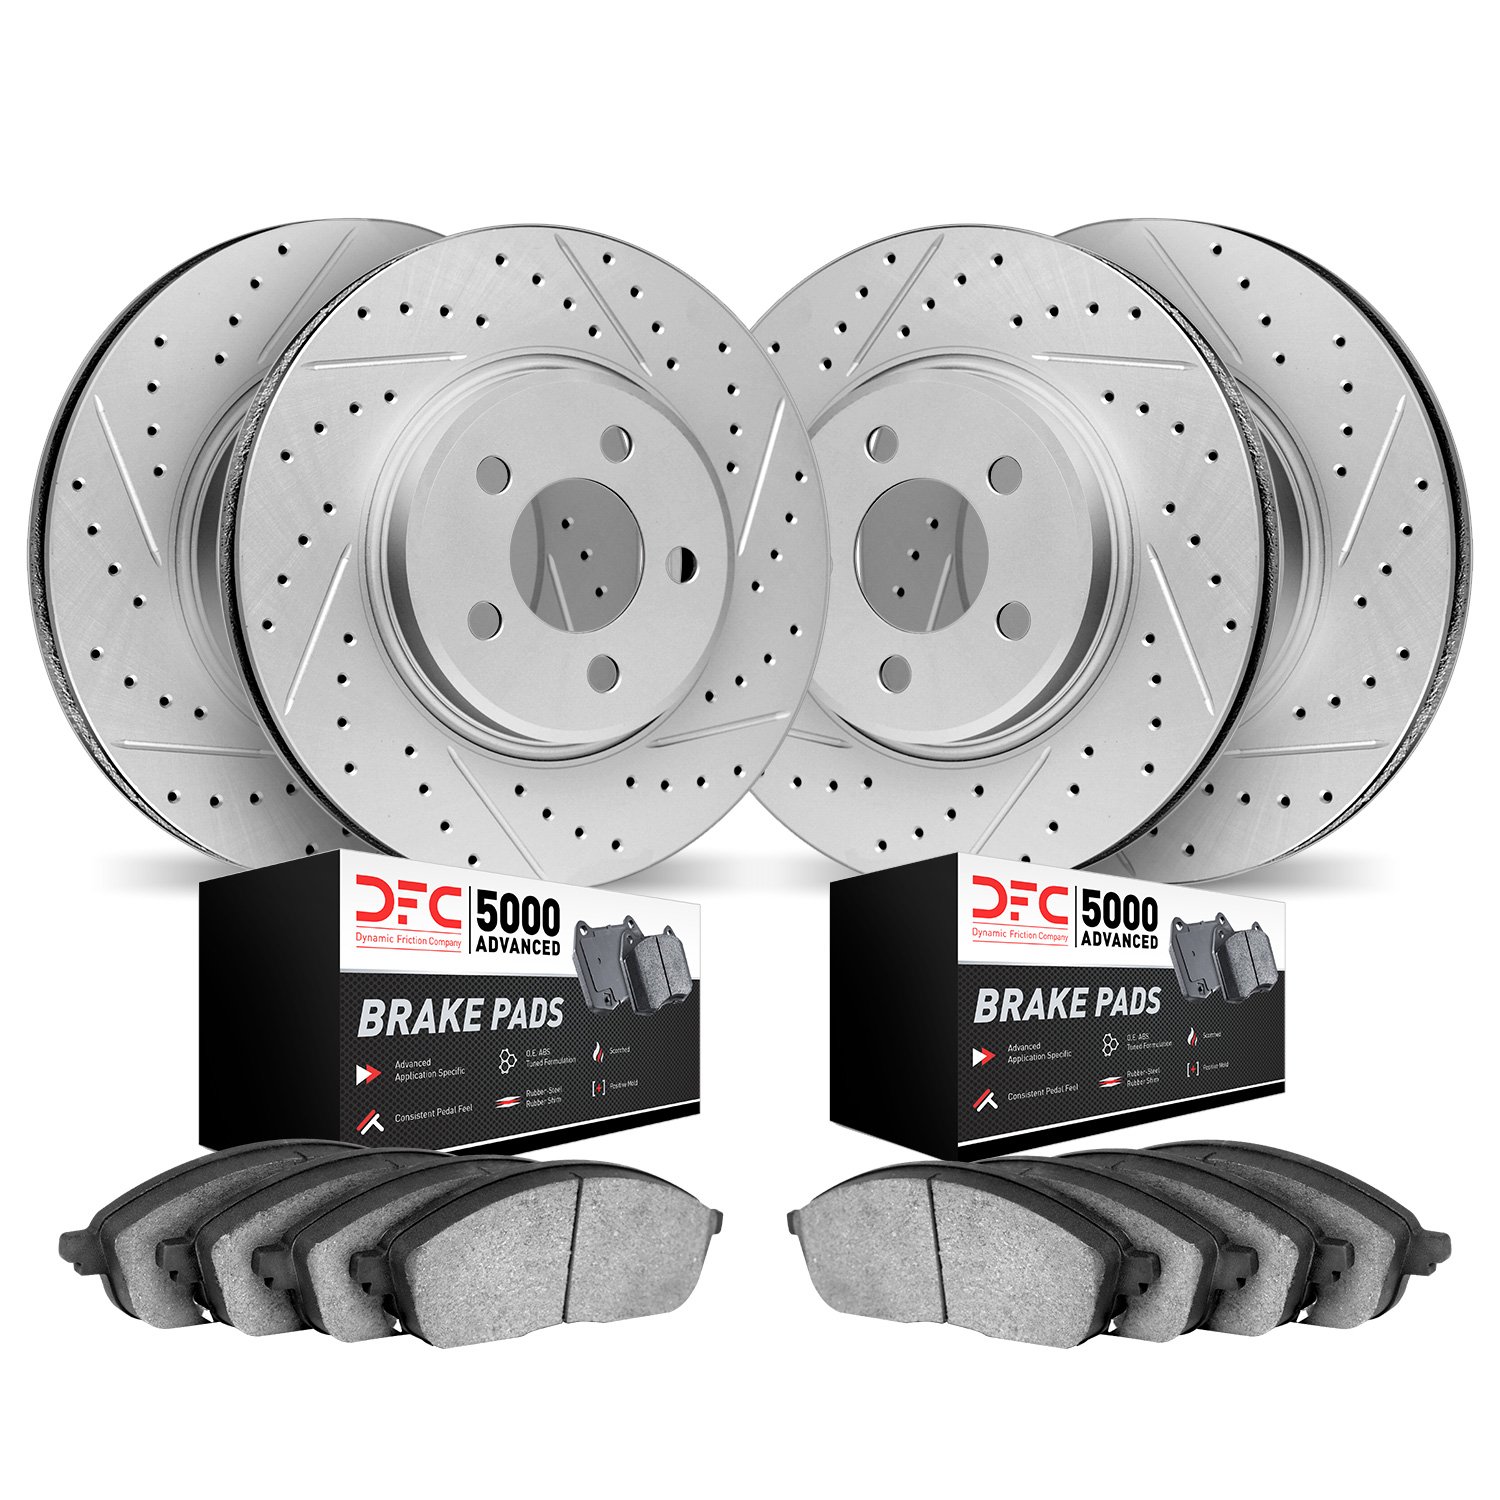 2504-76095 Geoperformance Drilled/Slotted Rotors w/5000 Advanced Brake Pads Kit, 1993-1998 Lexus/Toyota/Scion, Position: Front a